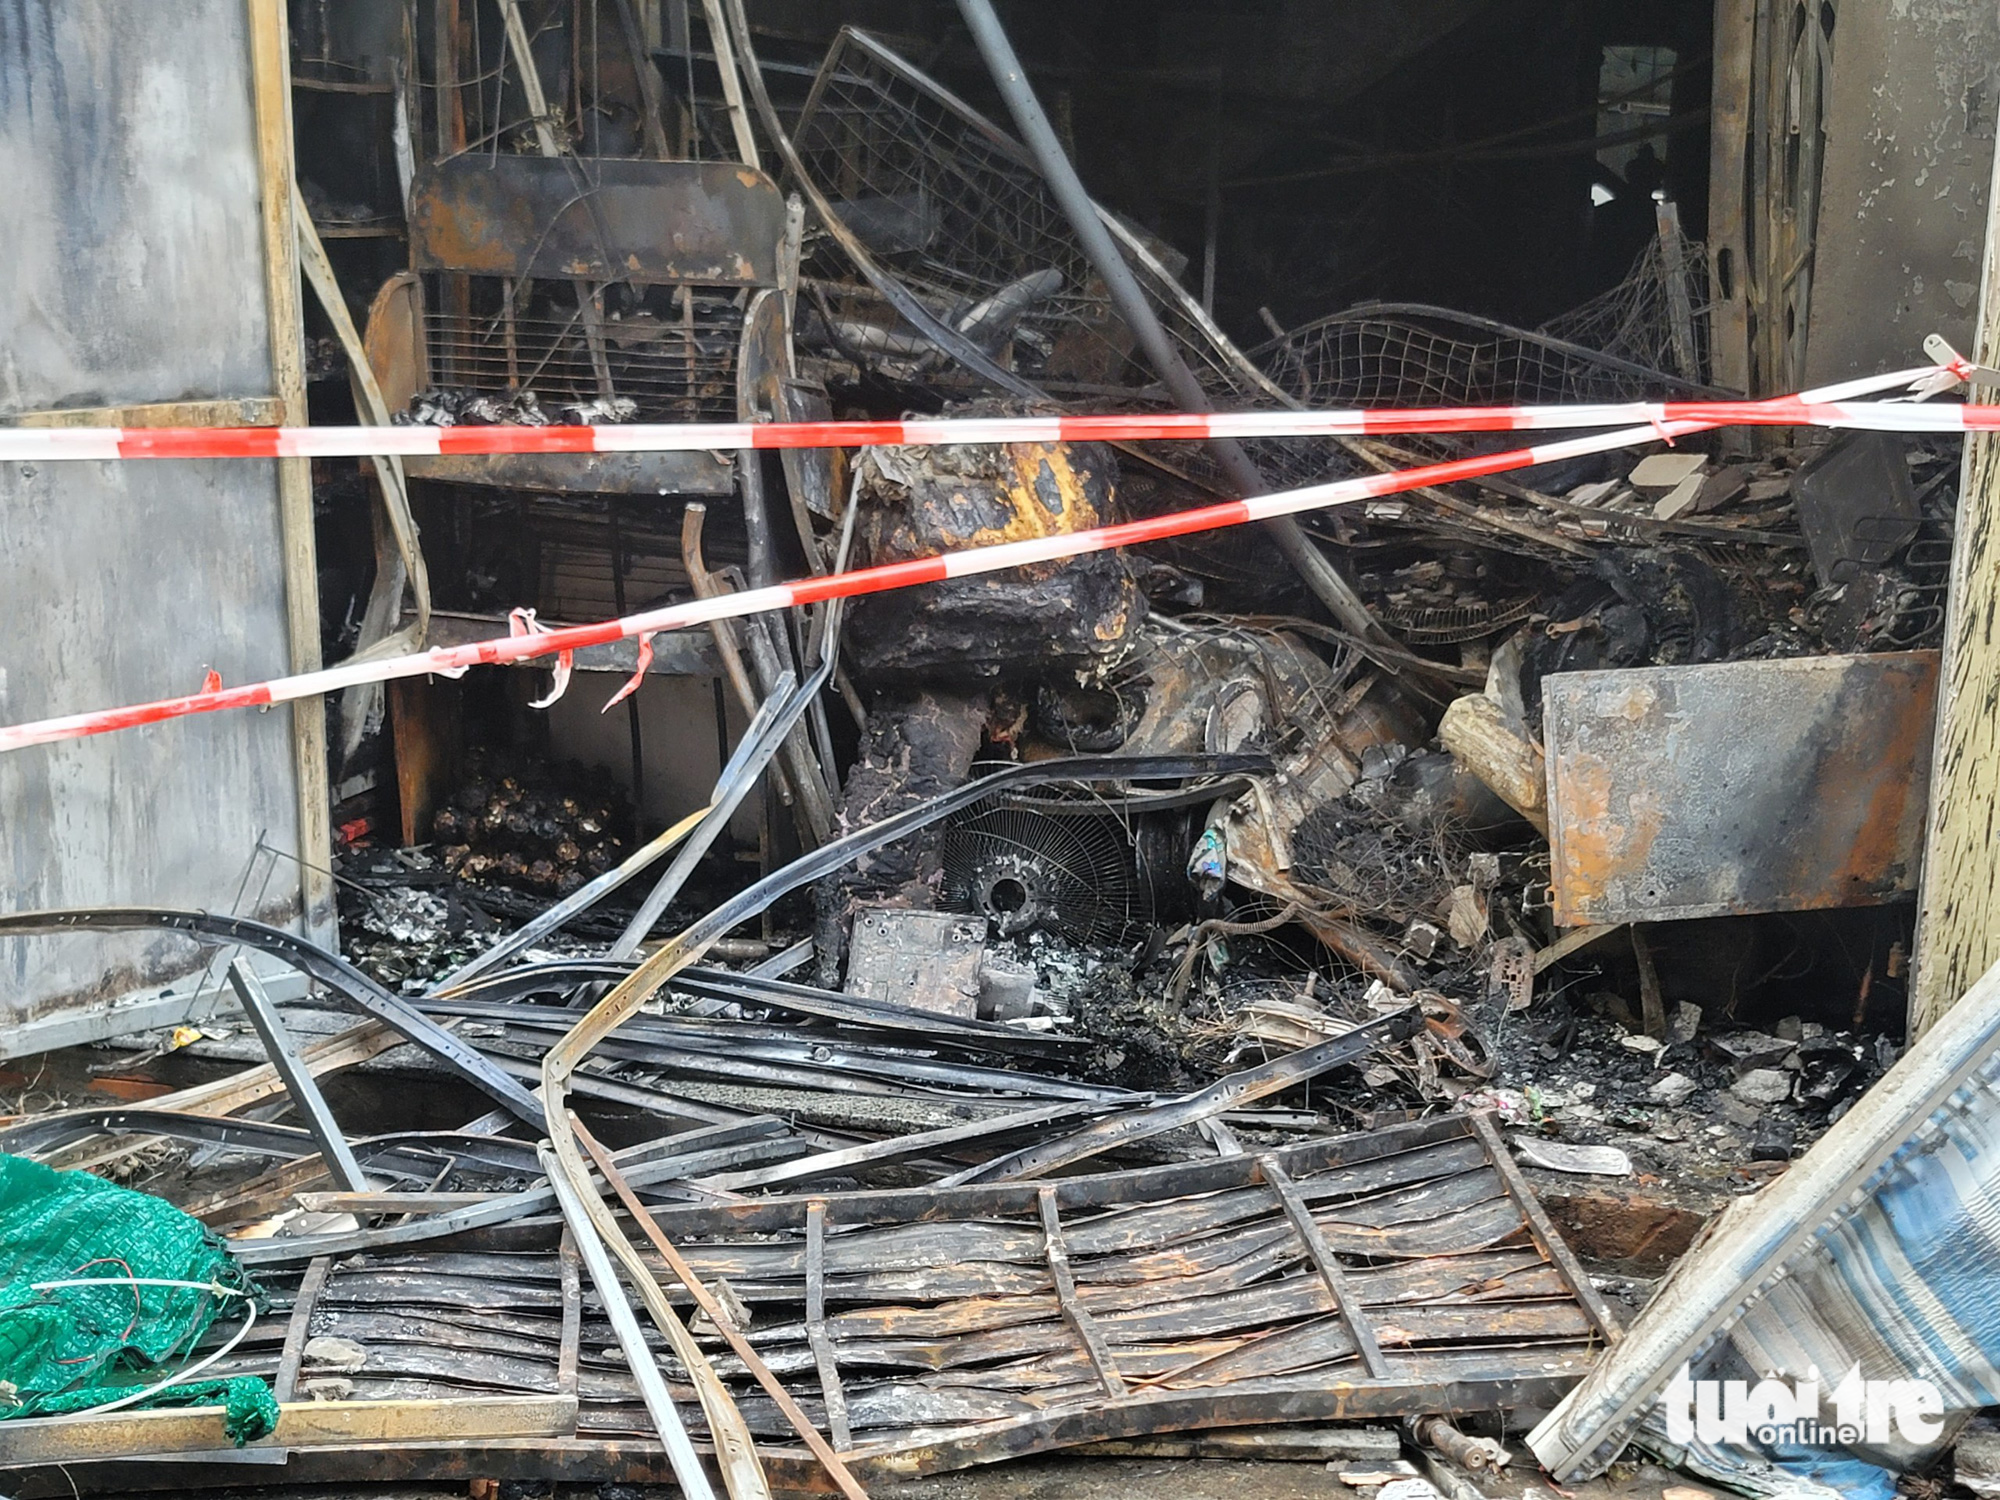 Equipment and devices inside the house were burned. Photo: Minh Chien / Tuoi Tre